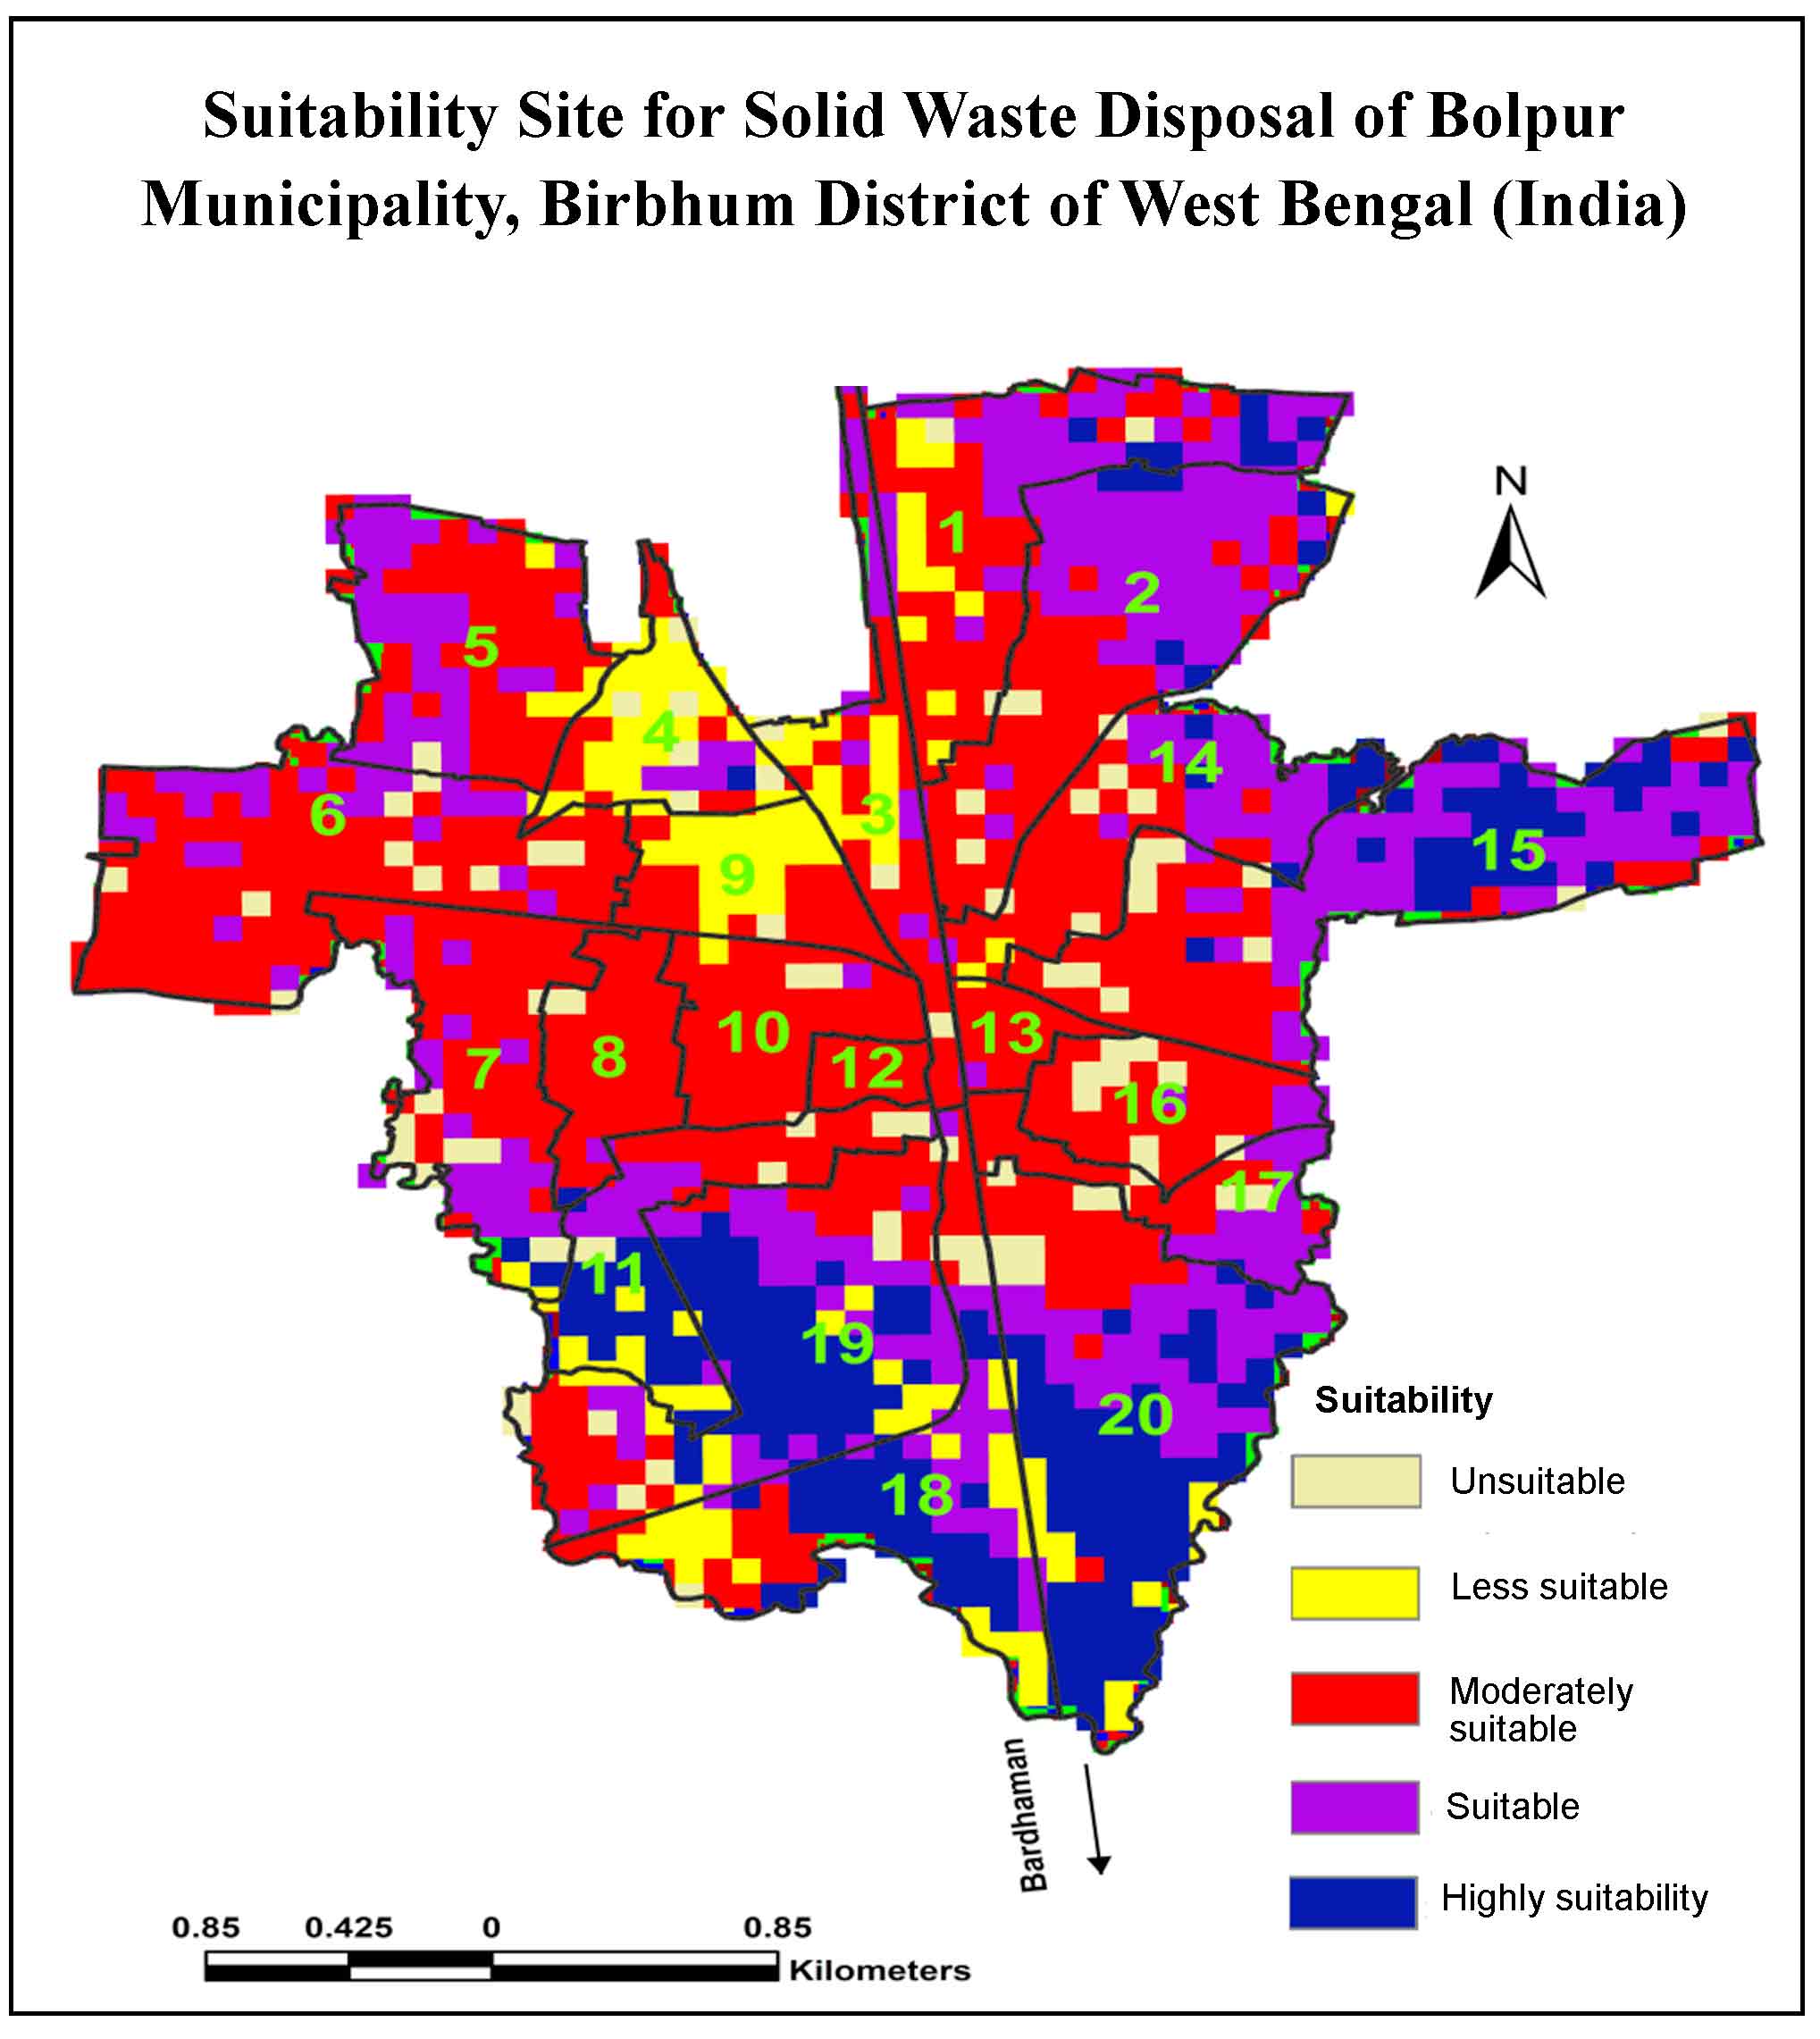 Site Suitability Analysis for Solid Waste Disposal of Bolpur Municipality, Birbhum District of West Bengal (India): Remote Sensing and AHP Approach